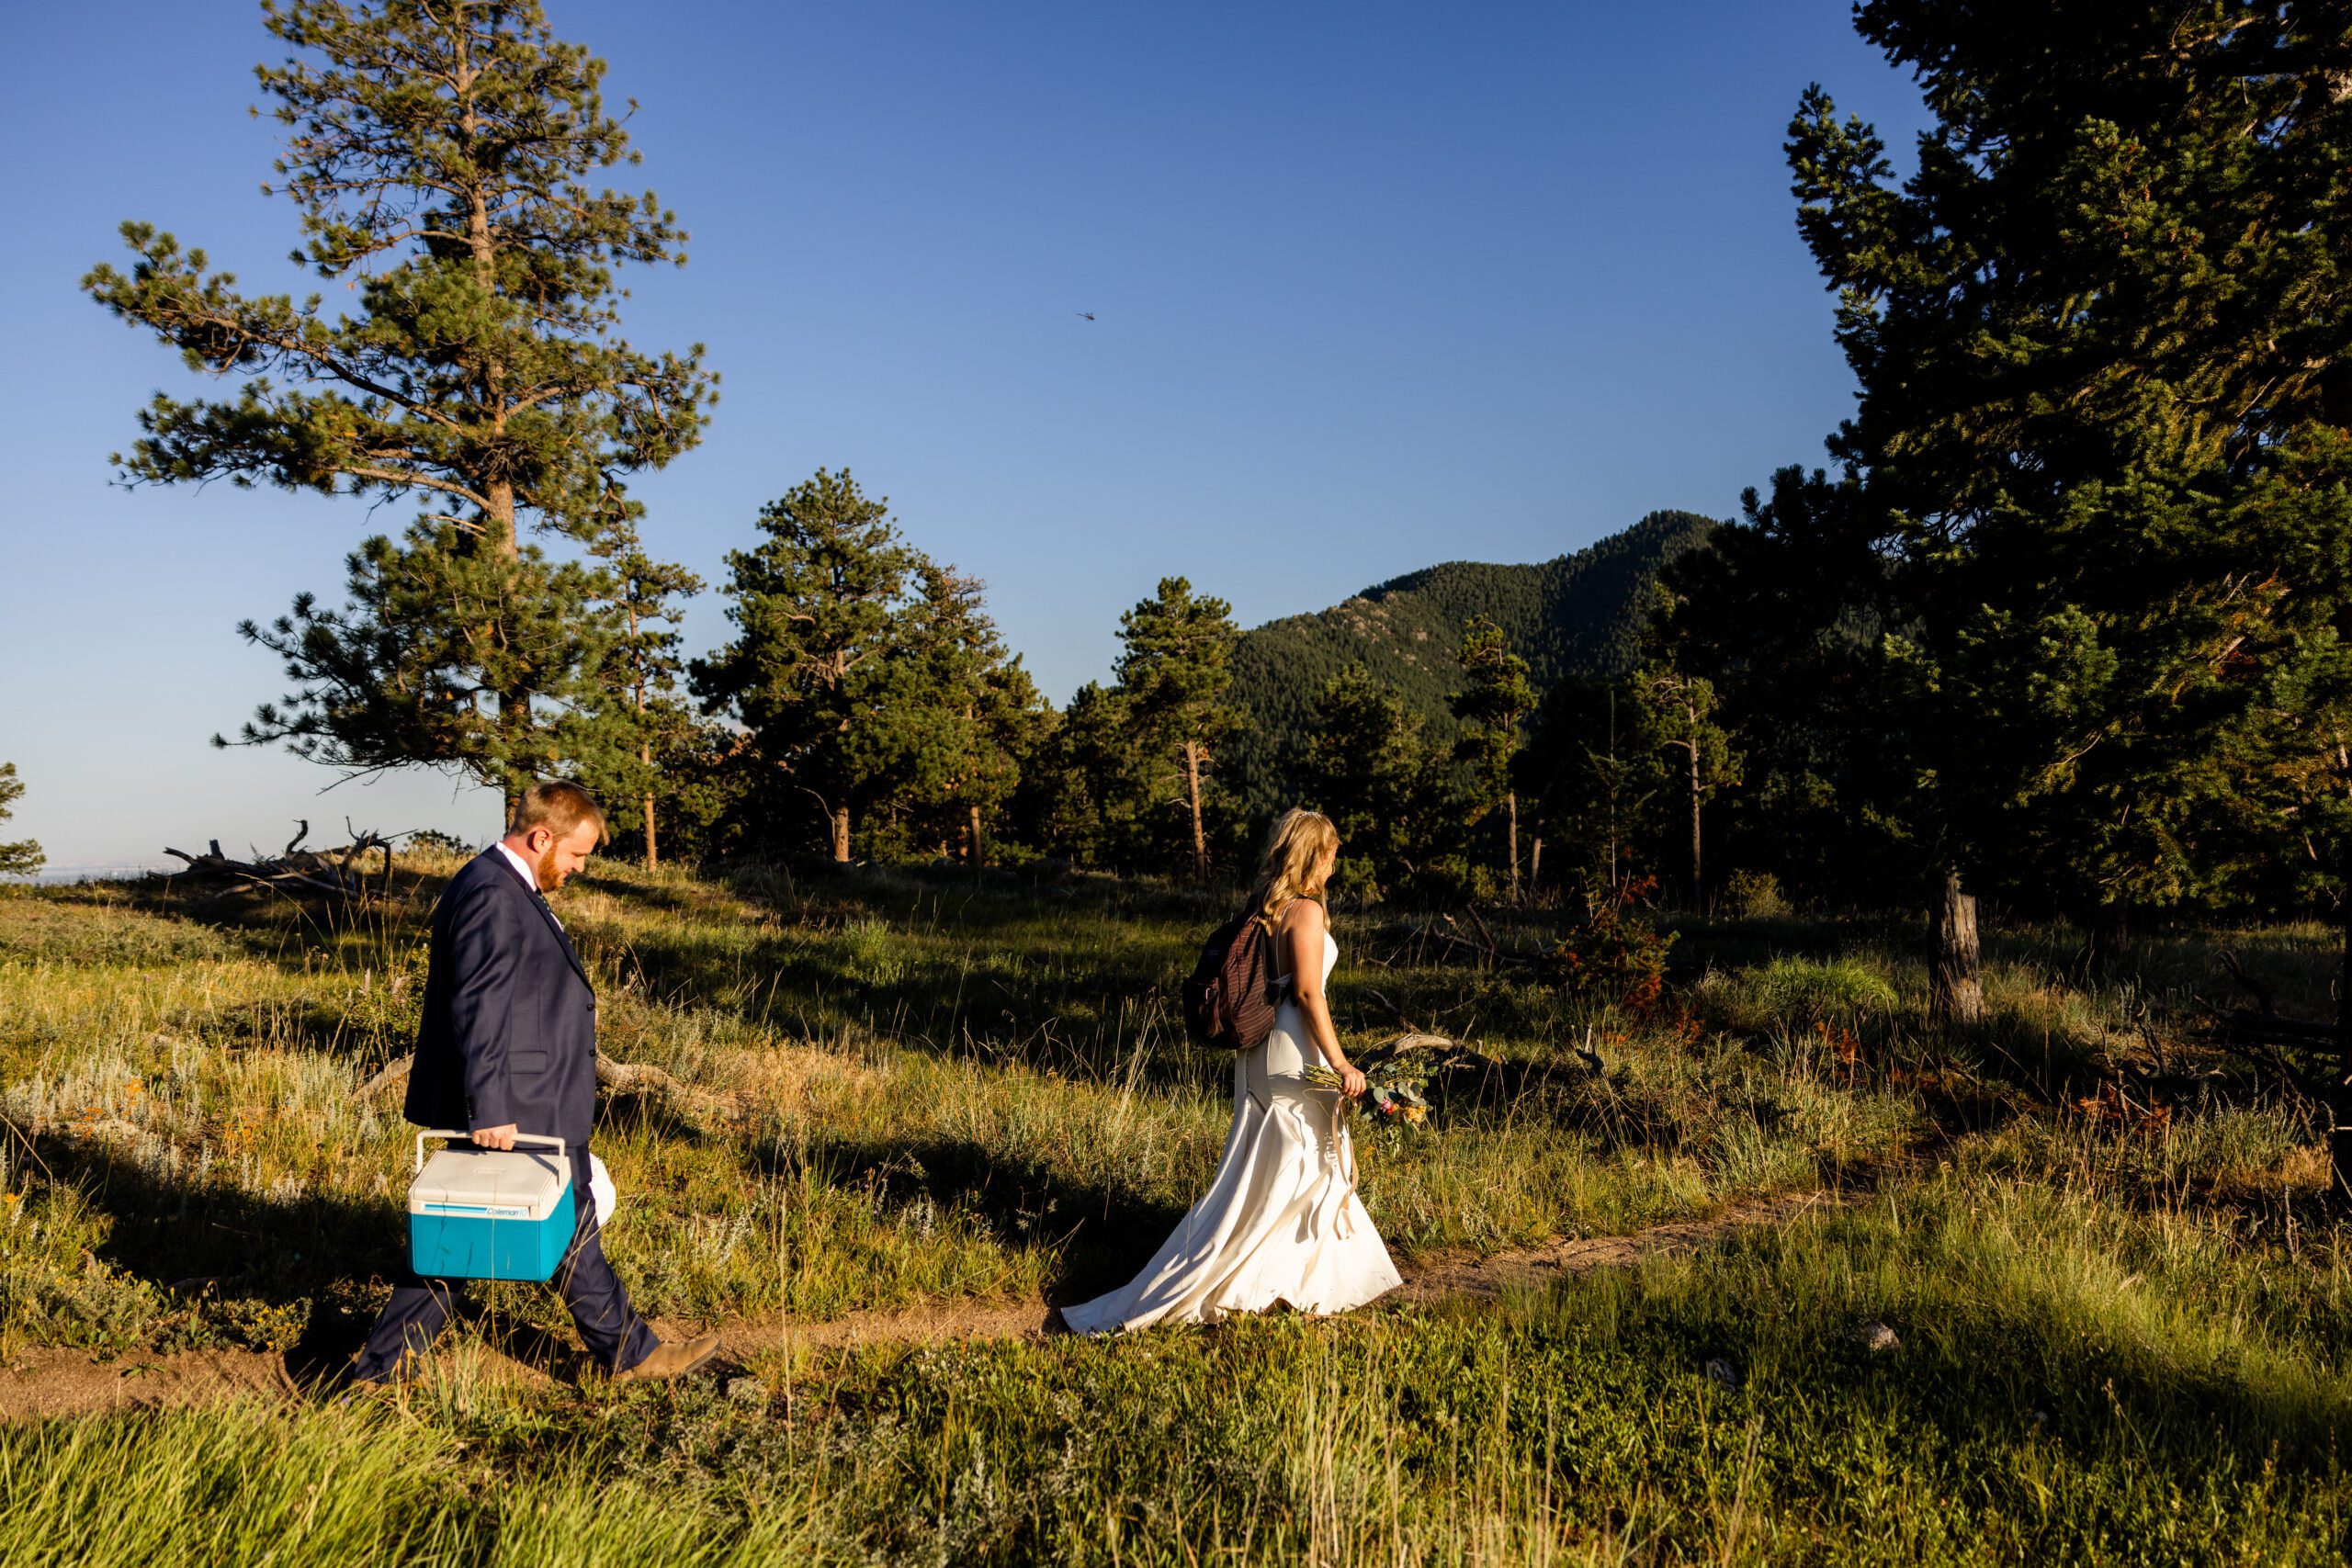 The bride and groom on their hike at sunset during their Sunrise Amphitheater wedding.